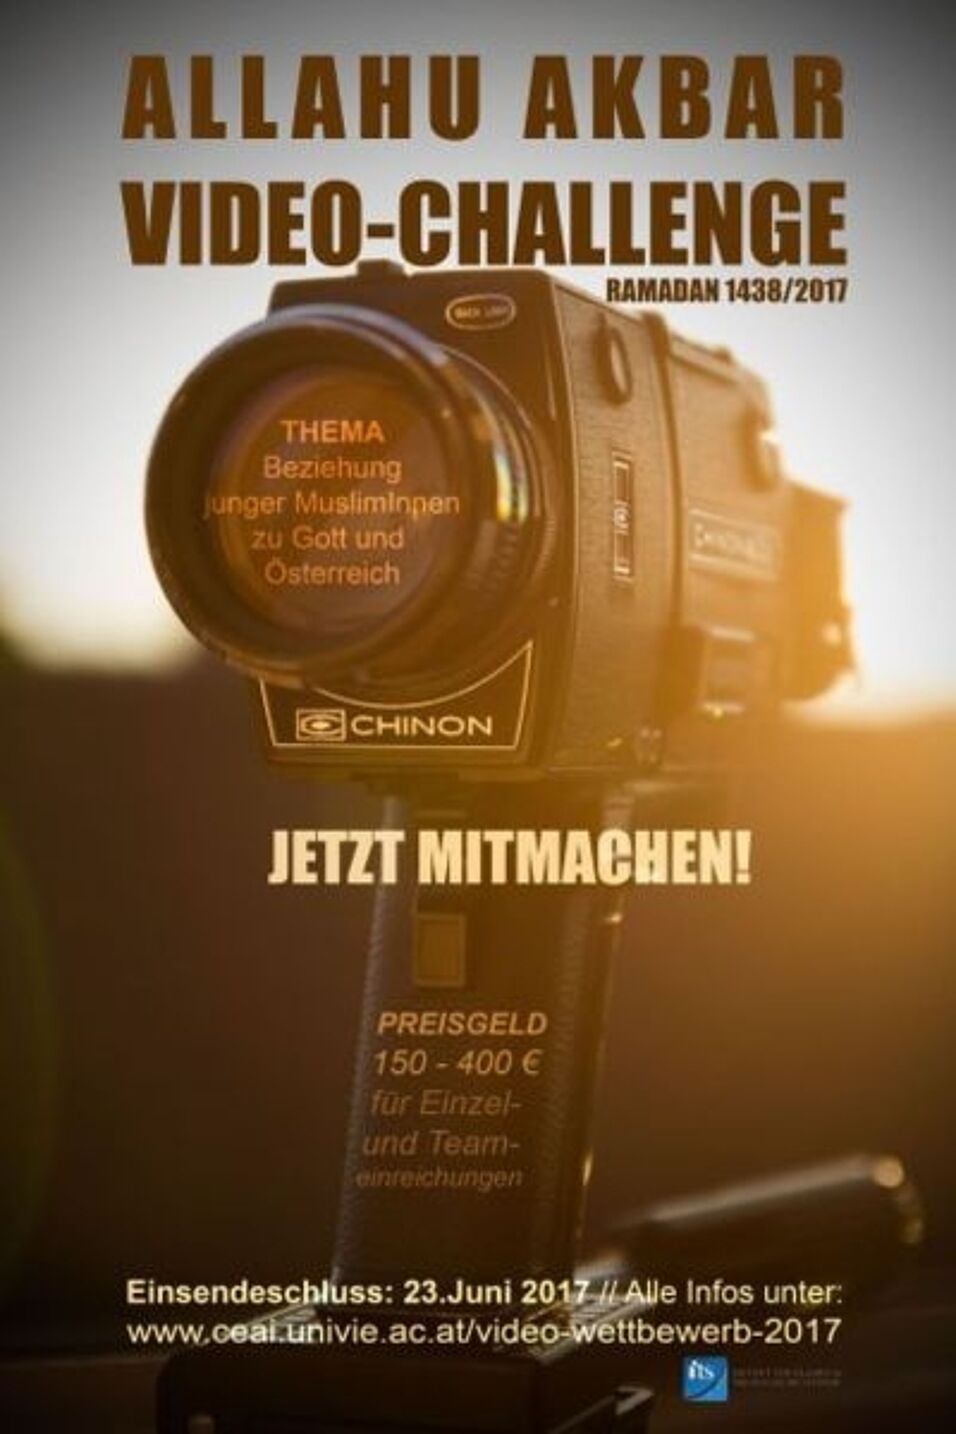 Enlarge in new tab. Poster with photo of a video camera in front of a sunset; information about the challenge on it